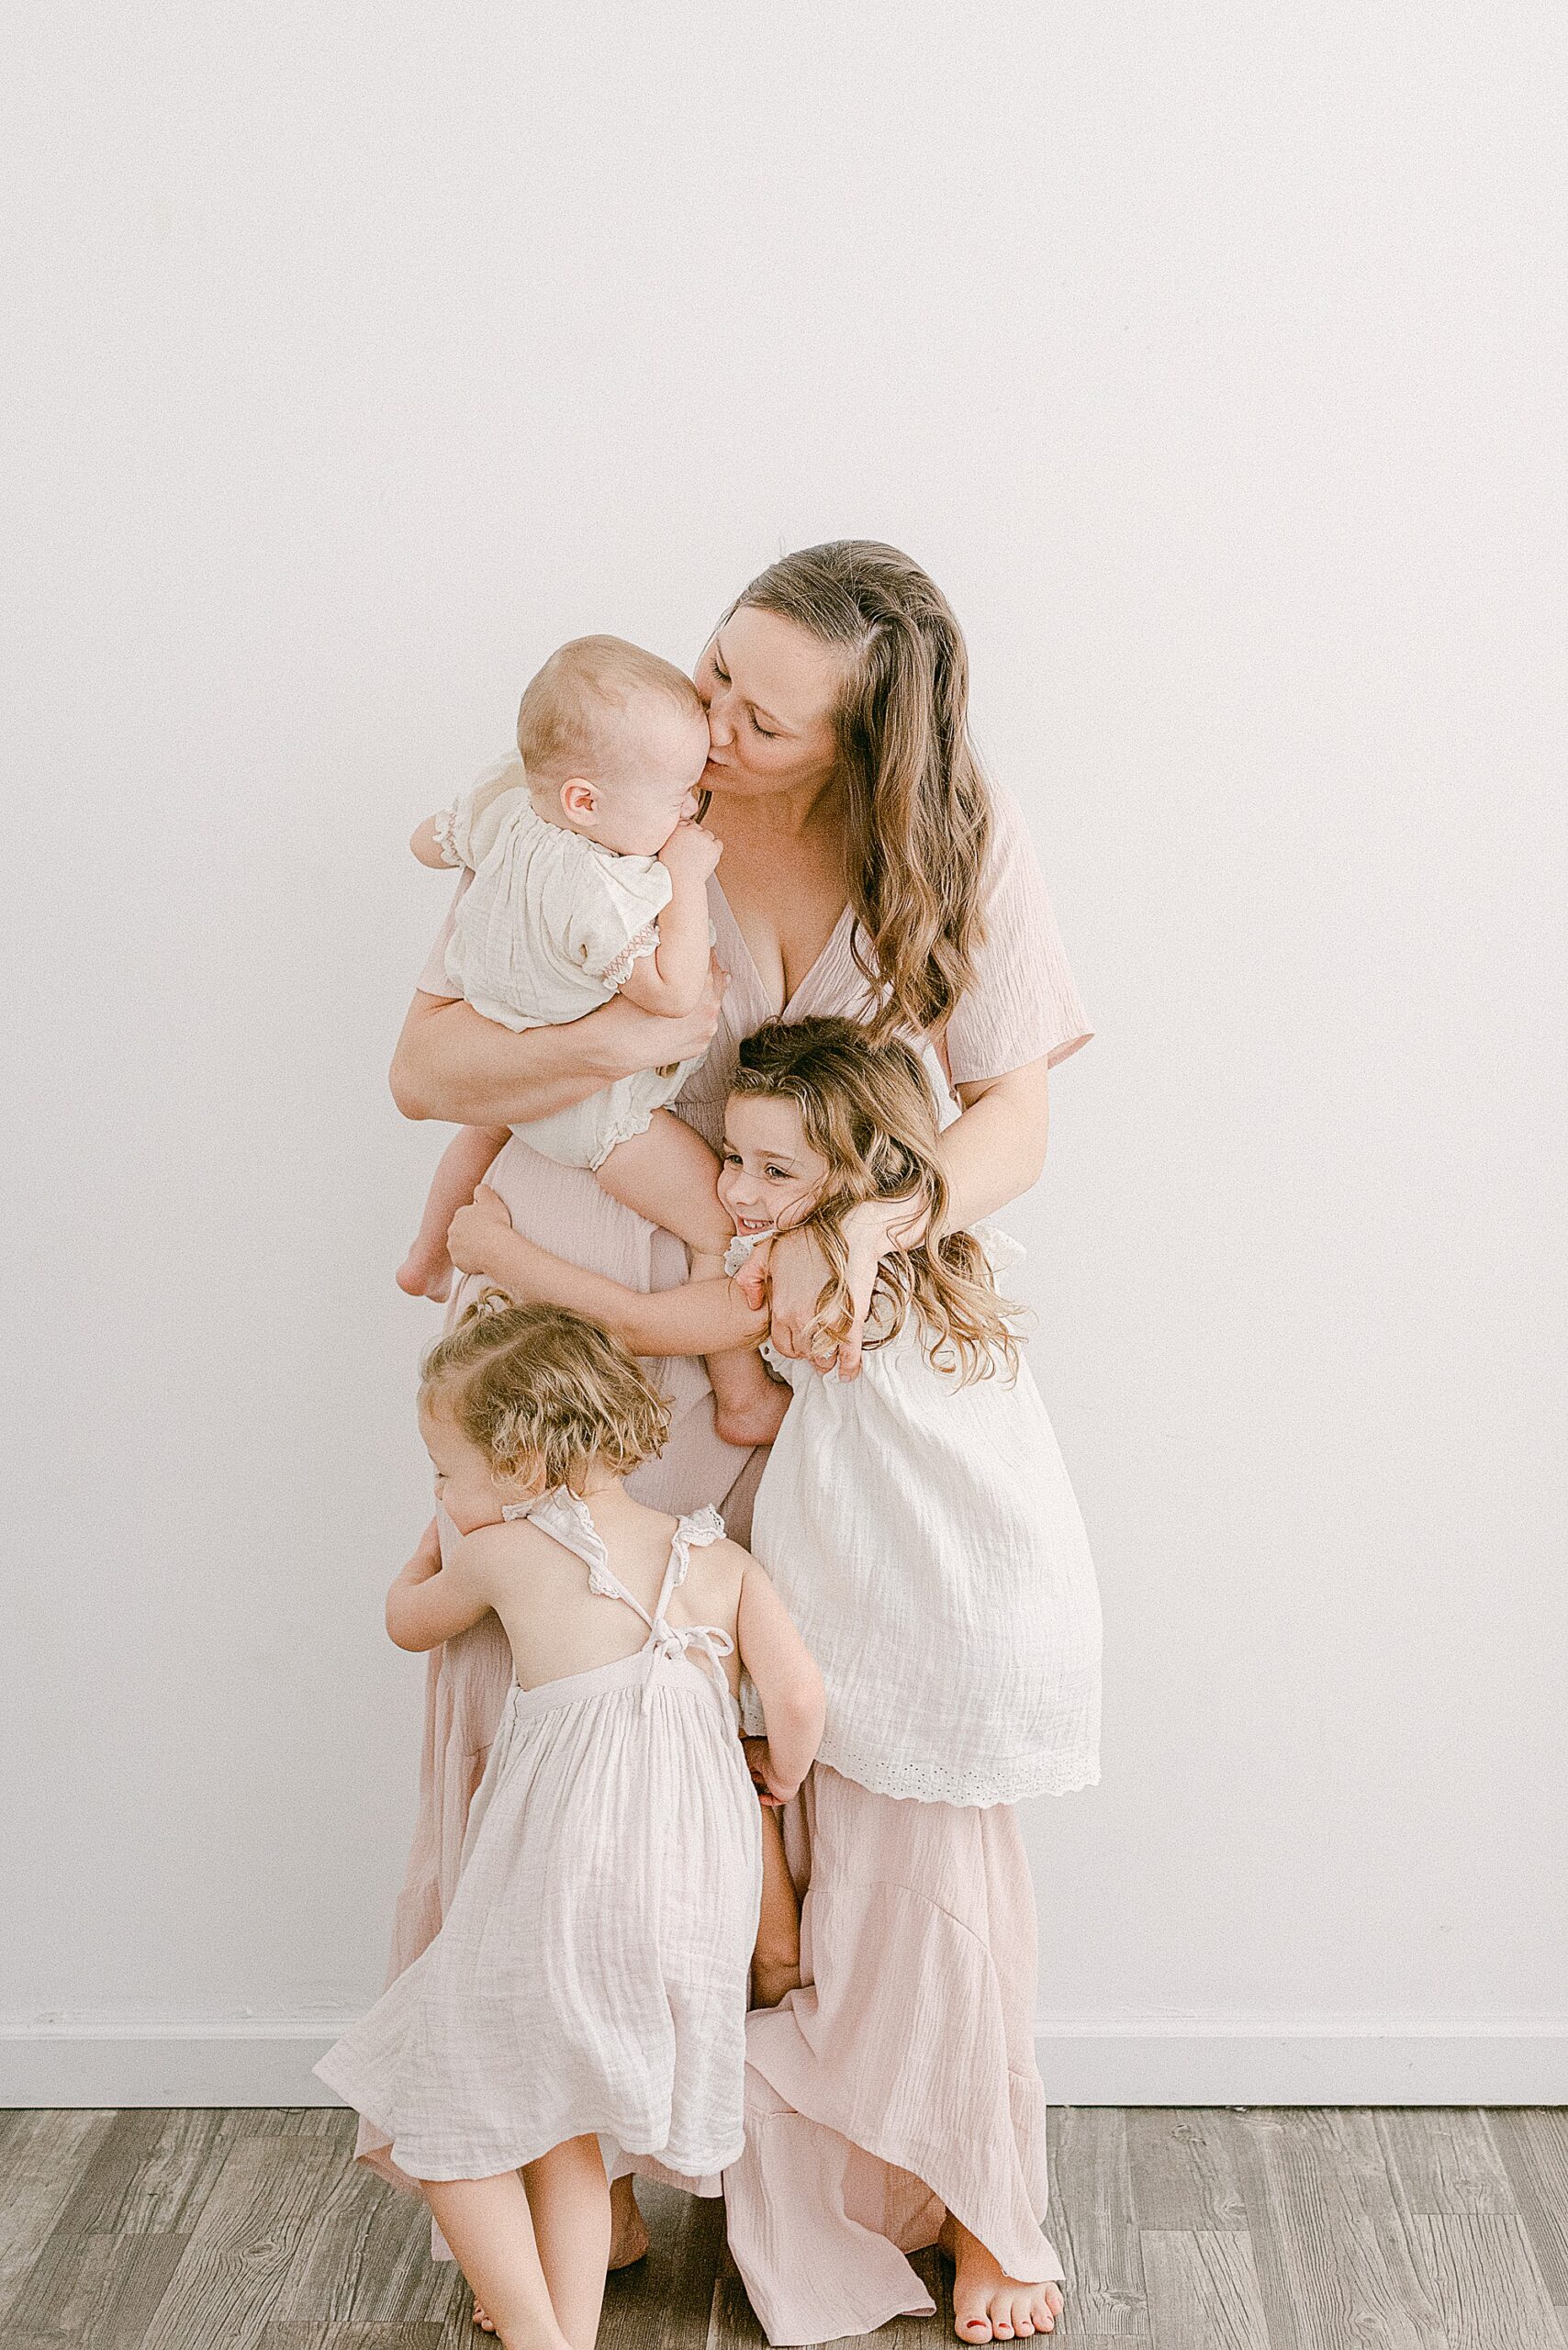 Gilbert mom being hugged by three toddler girls. They're all dressed in white and blush pink dresses for family photoshoot.